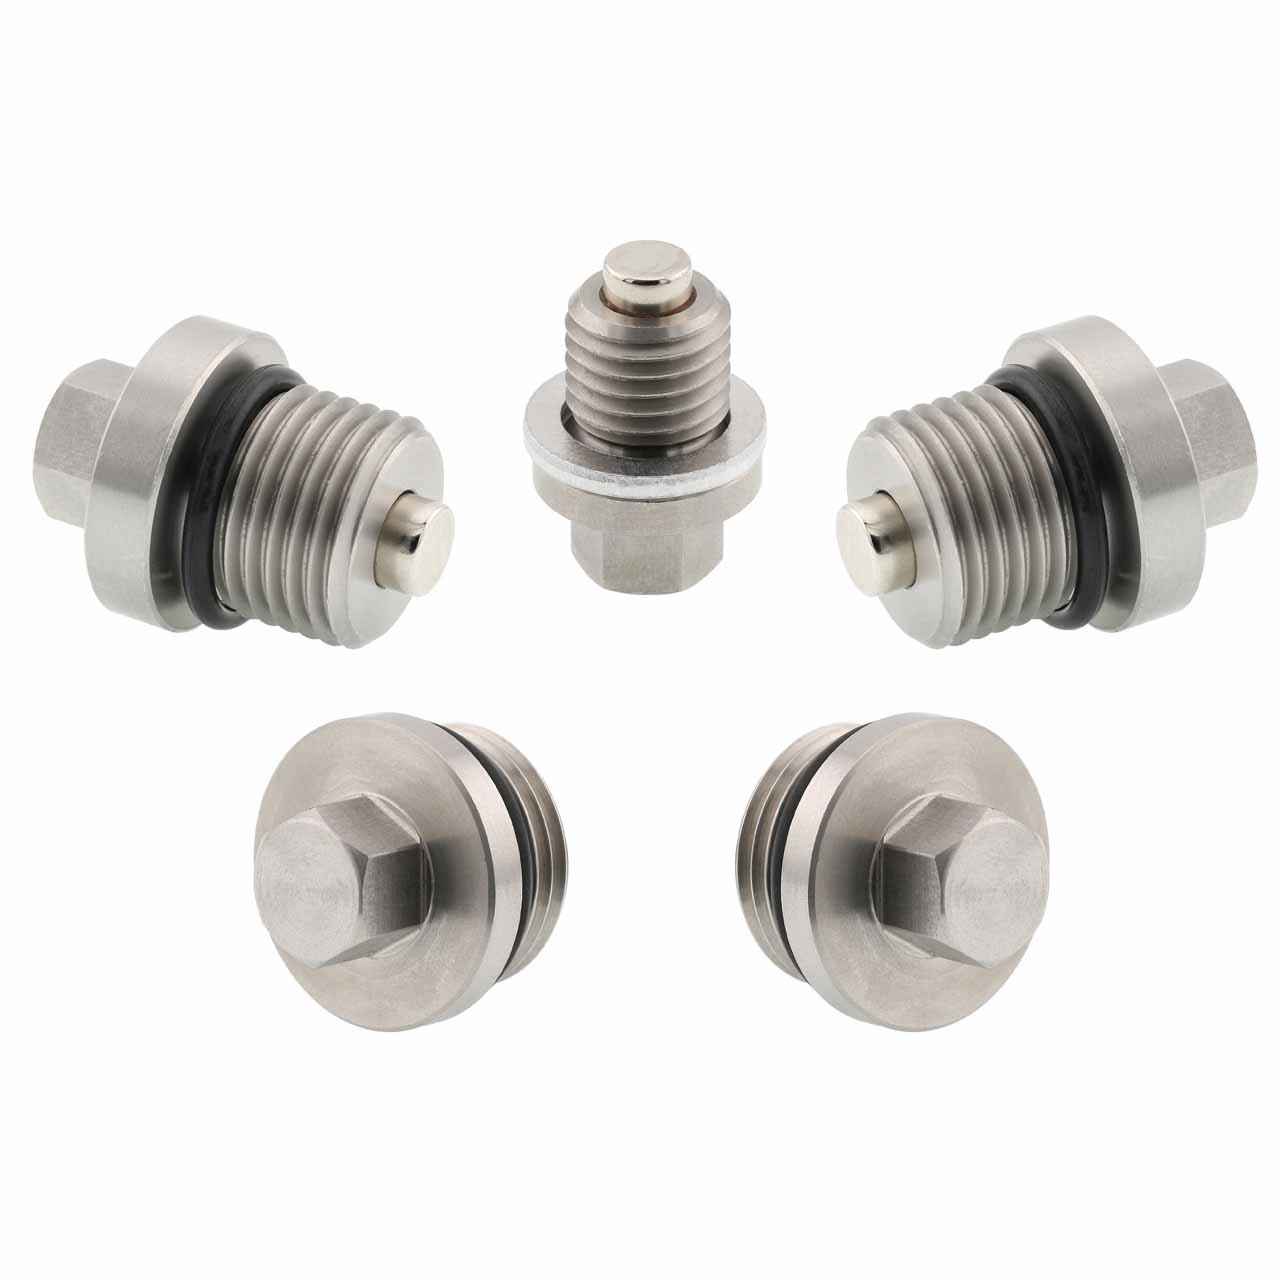 Polaris RZR XP 4 1000 Magnetic Oil Drain Plug Kit - 2020-2021 - Engine, Transmission, Differential - Made In USA